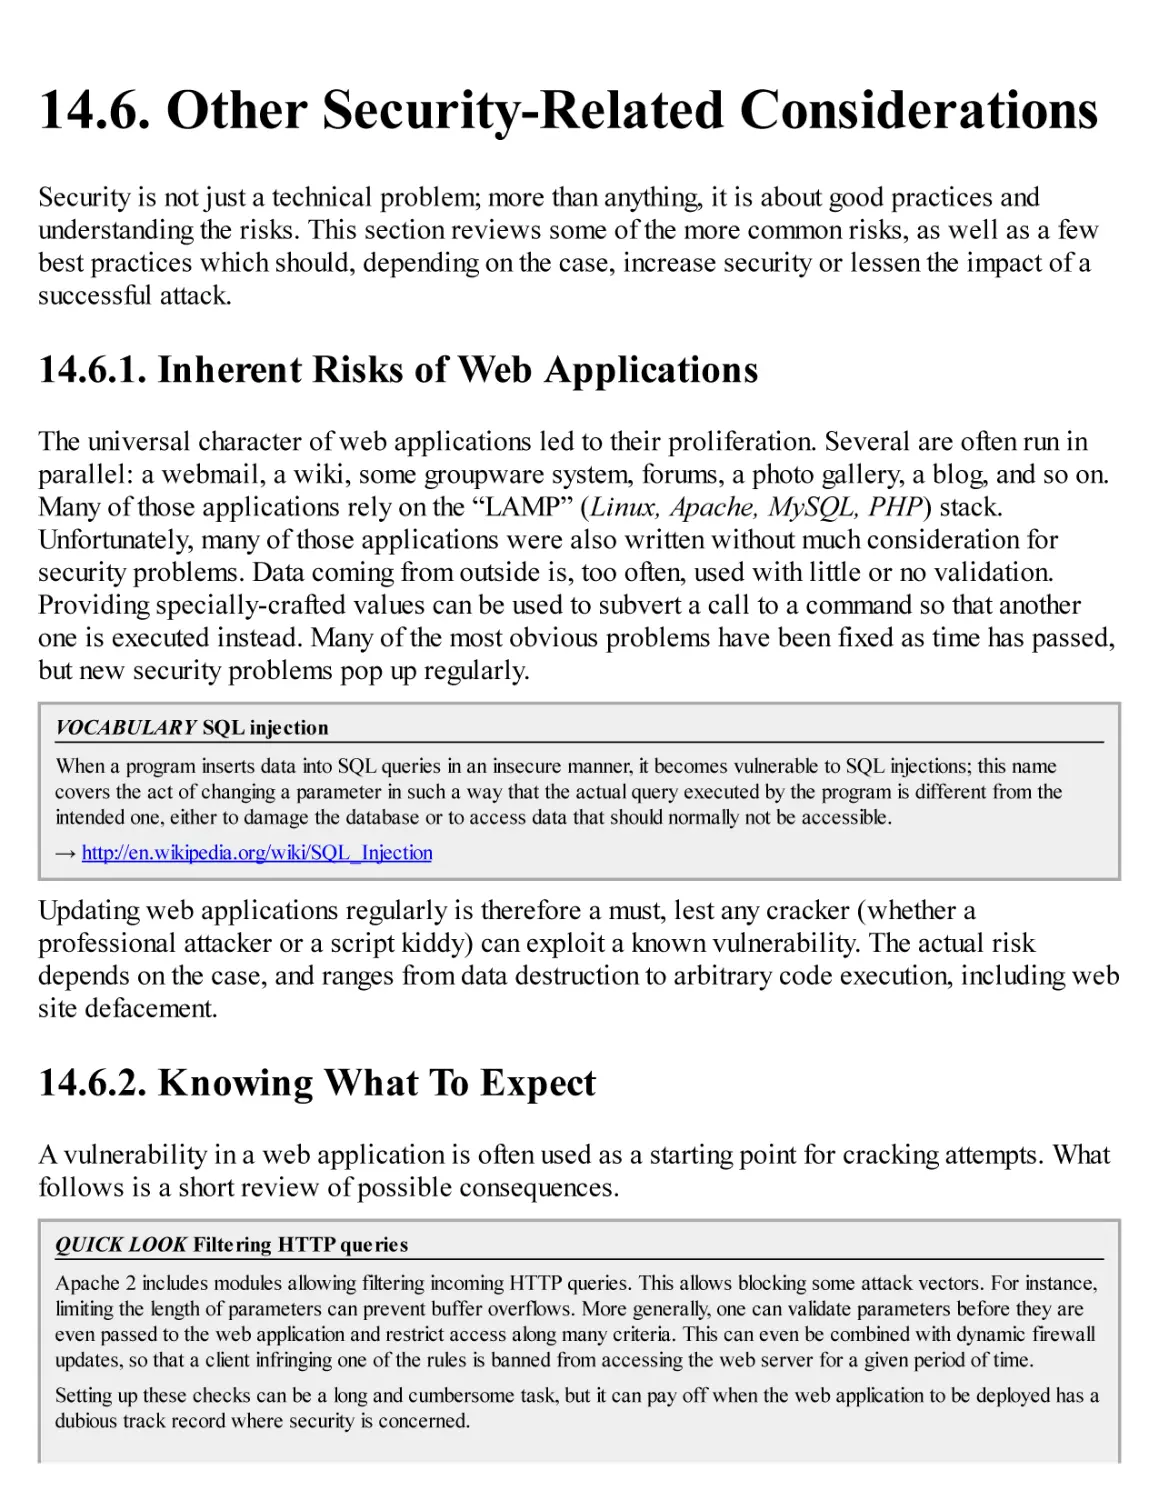 14.6. Other Security-Related Considerations
14.6.1. Inherent Risks of Web Applications
14.6.2. Knowing What To Expect